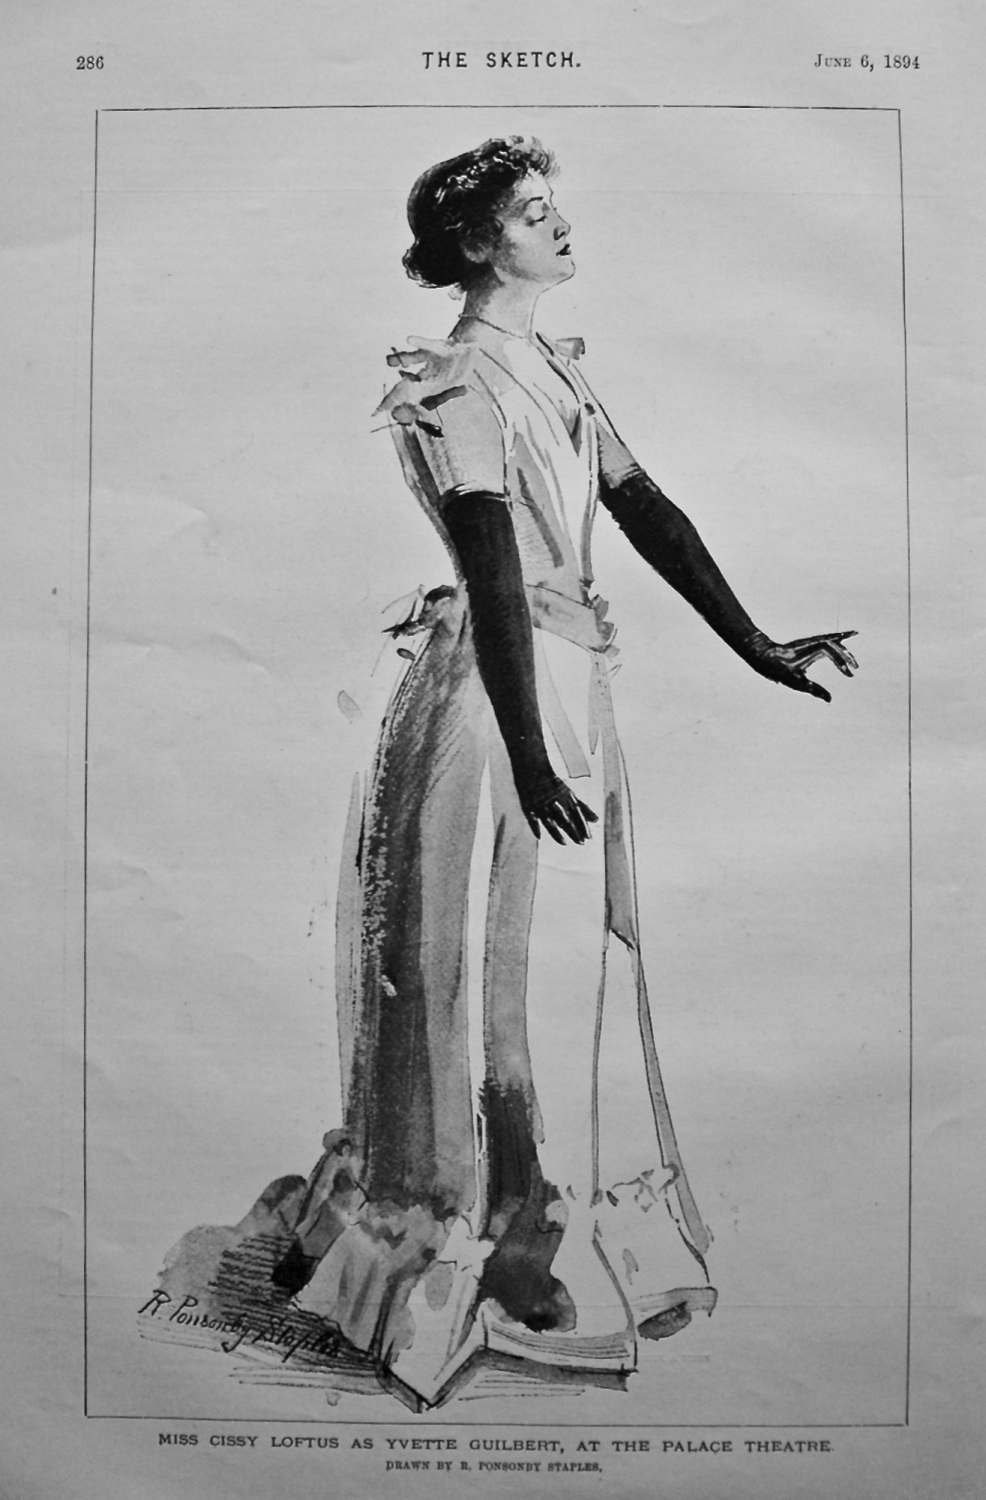 Miss Cissy Loftus as Yvette Guilbert, at the Palace Theatre. 1894.